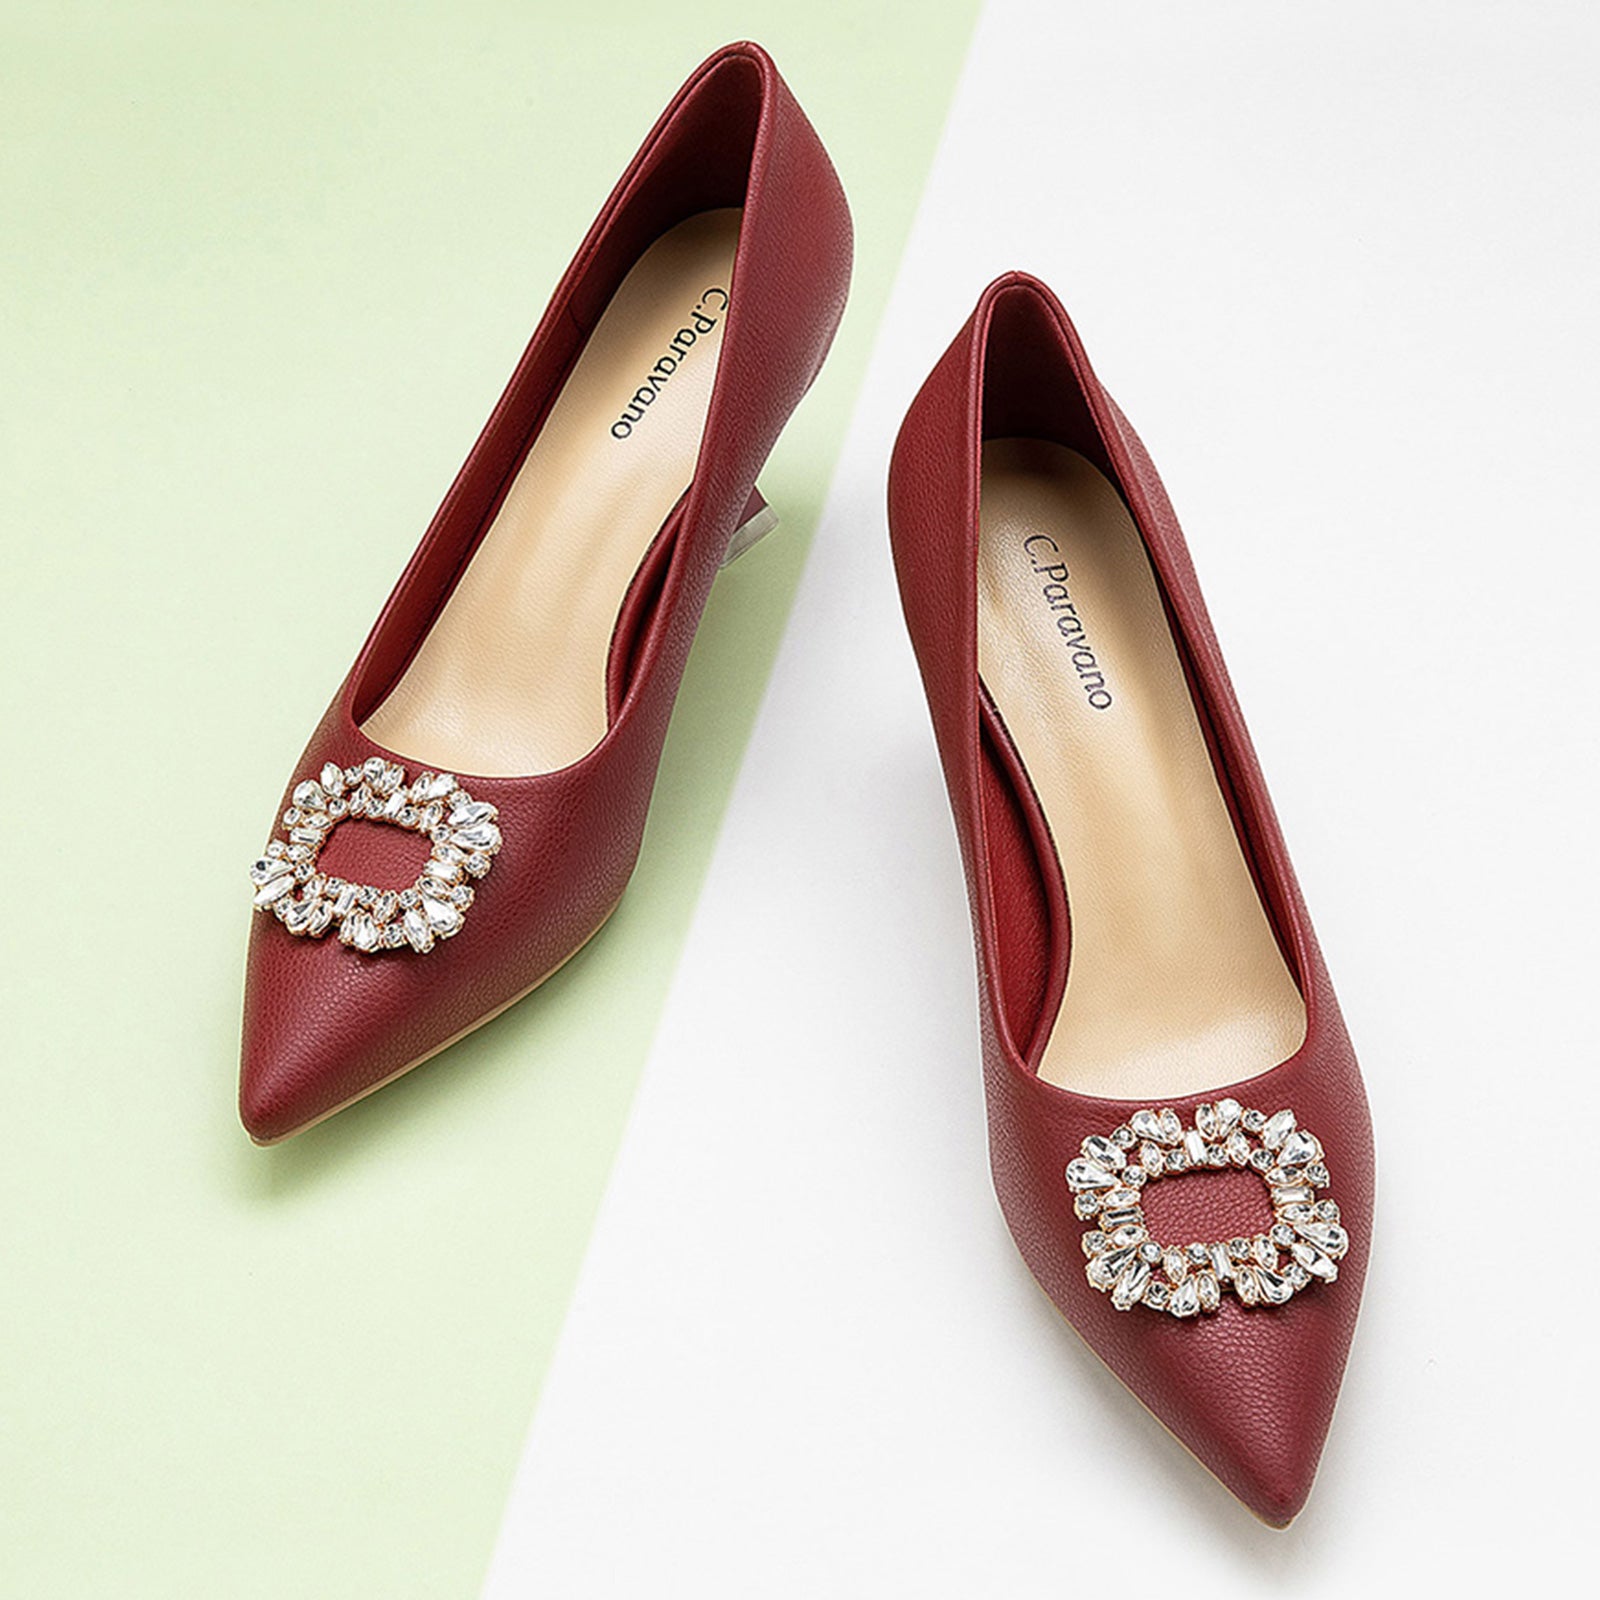 Sultry Sophistication: Red Buckle Kitten Heel Pumps with embellishments, adding a touch of elegance to your fashion repertoire